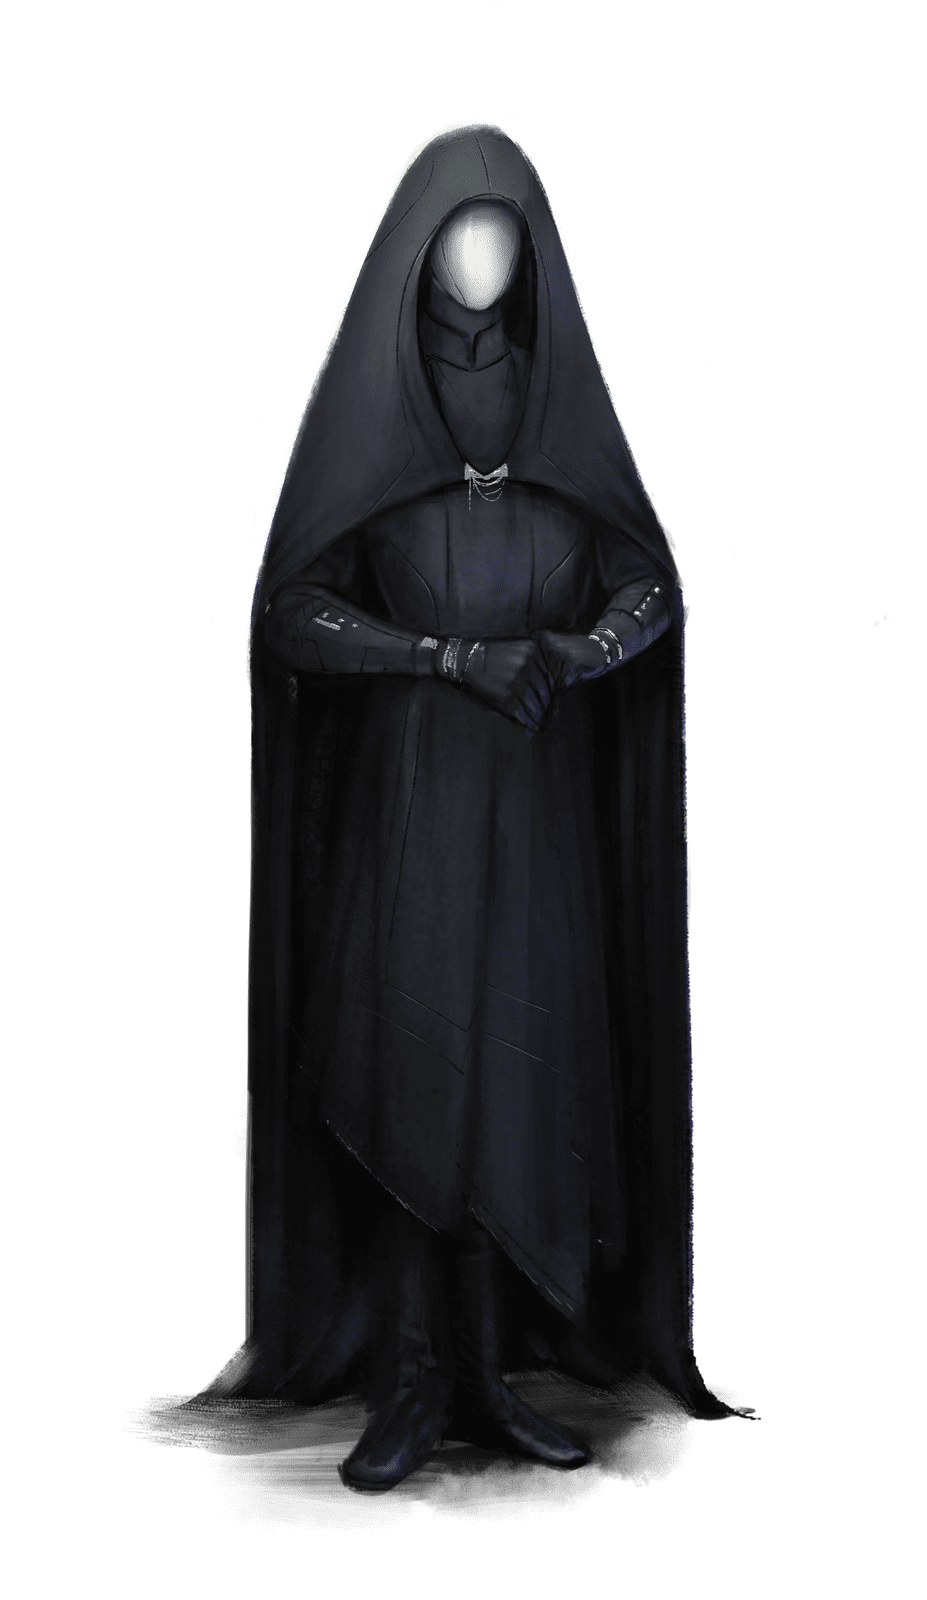 Stationfall board game - space nun